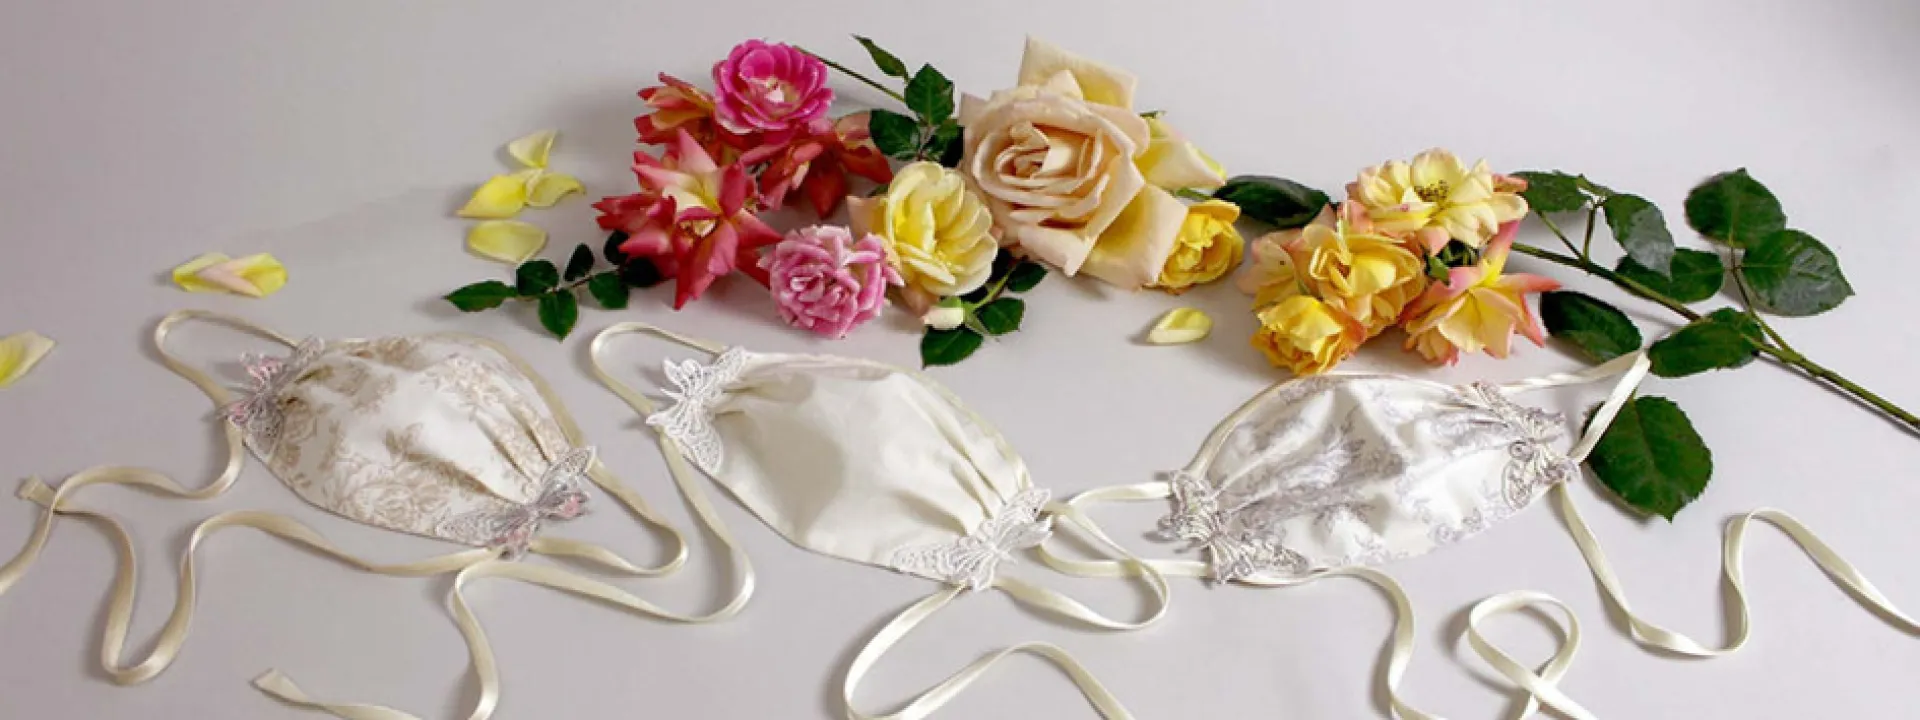 Collection of masks designed by bridal designer Claire Pettibone